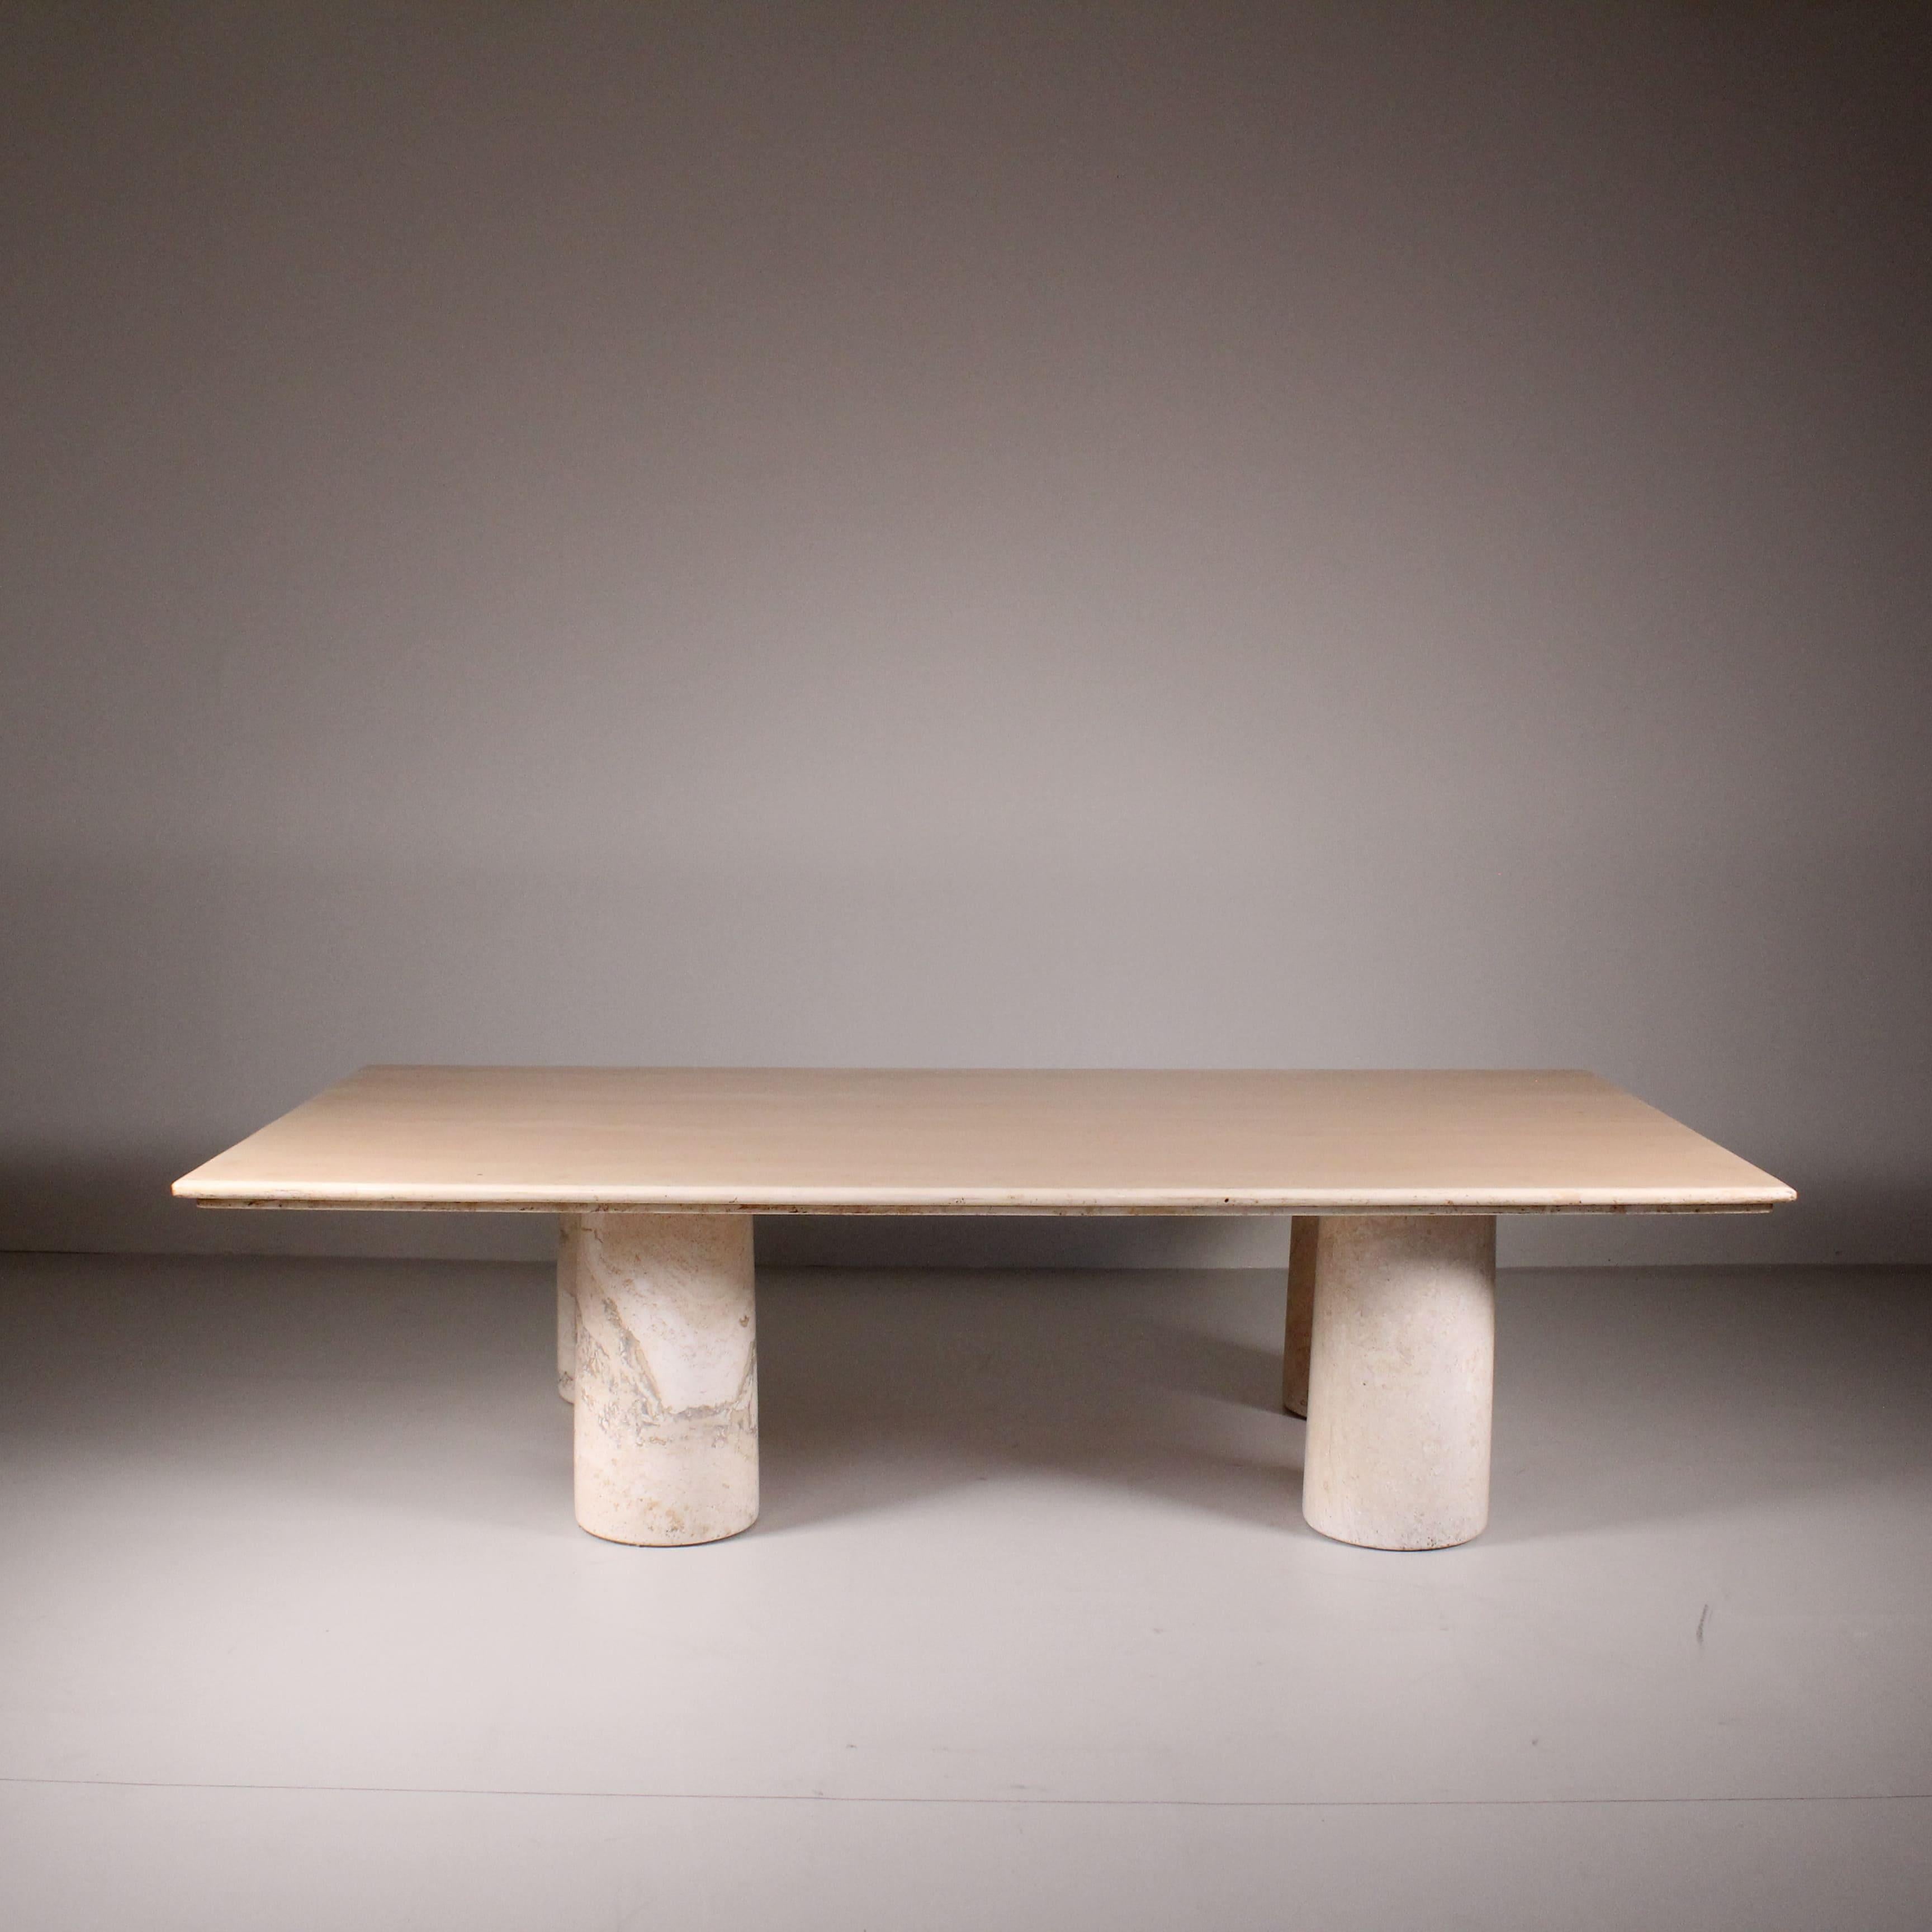  Colonnaded marble coffee table, Mario Bellini, Cassina, 1969 For Sale 2